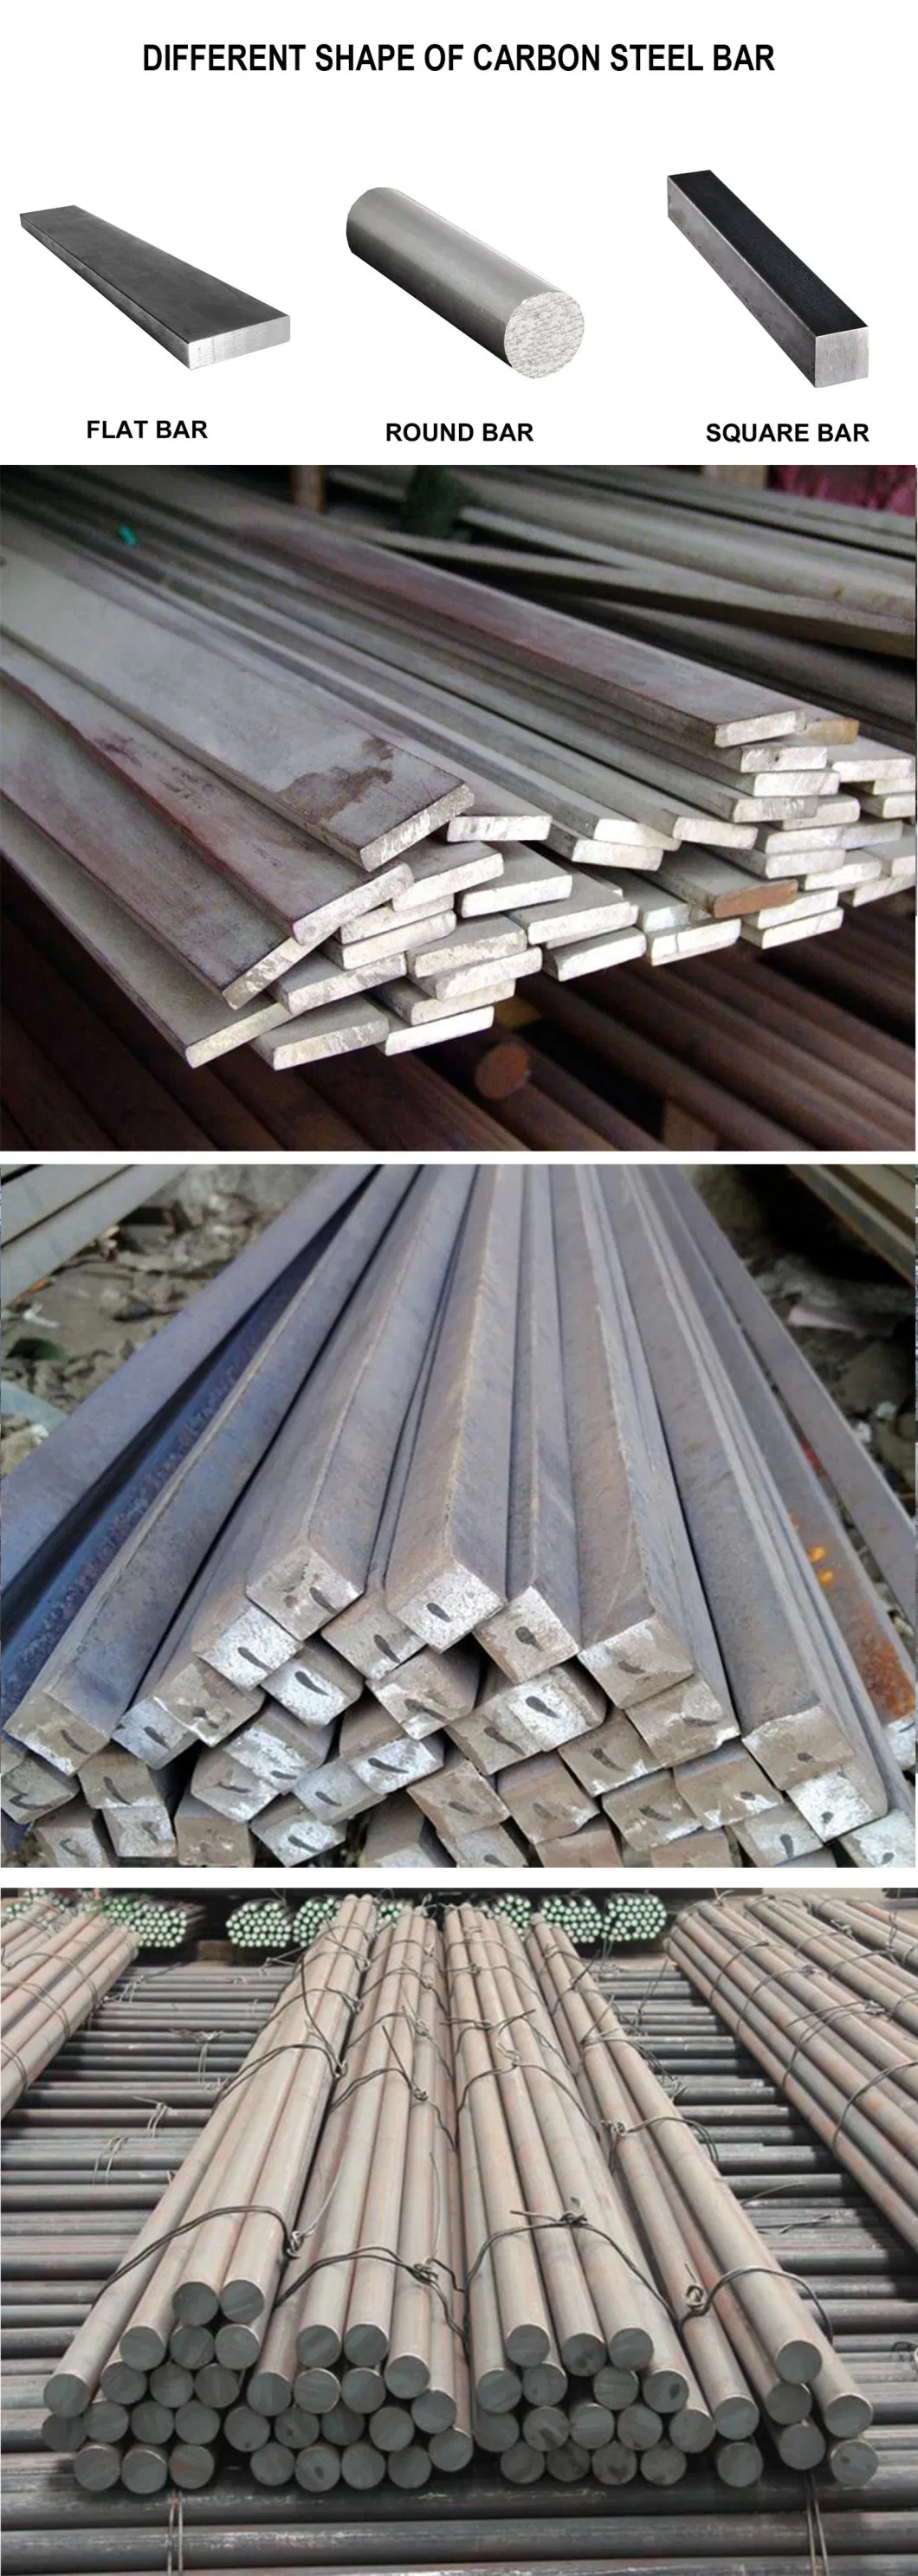 2crmo4 Hot Rolled Carbon Alloy Steel Solid Round Bar Round